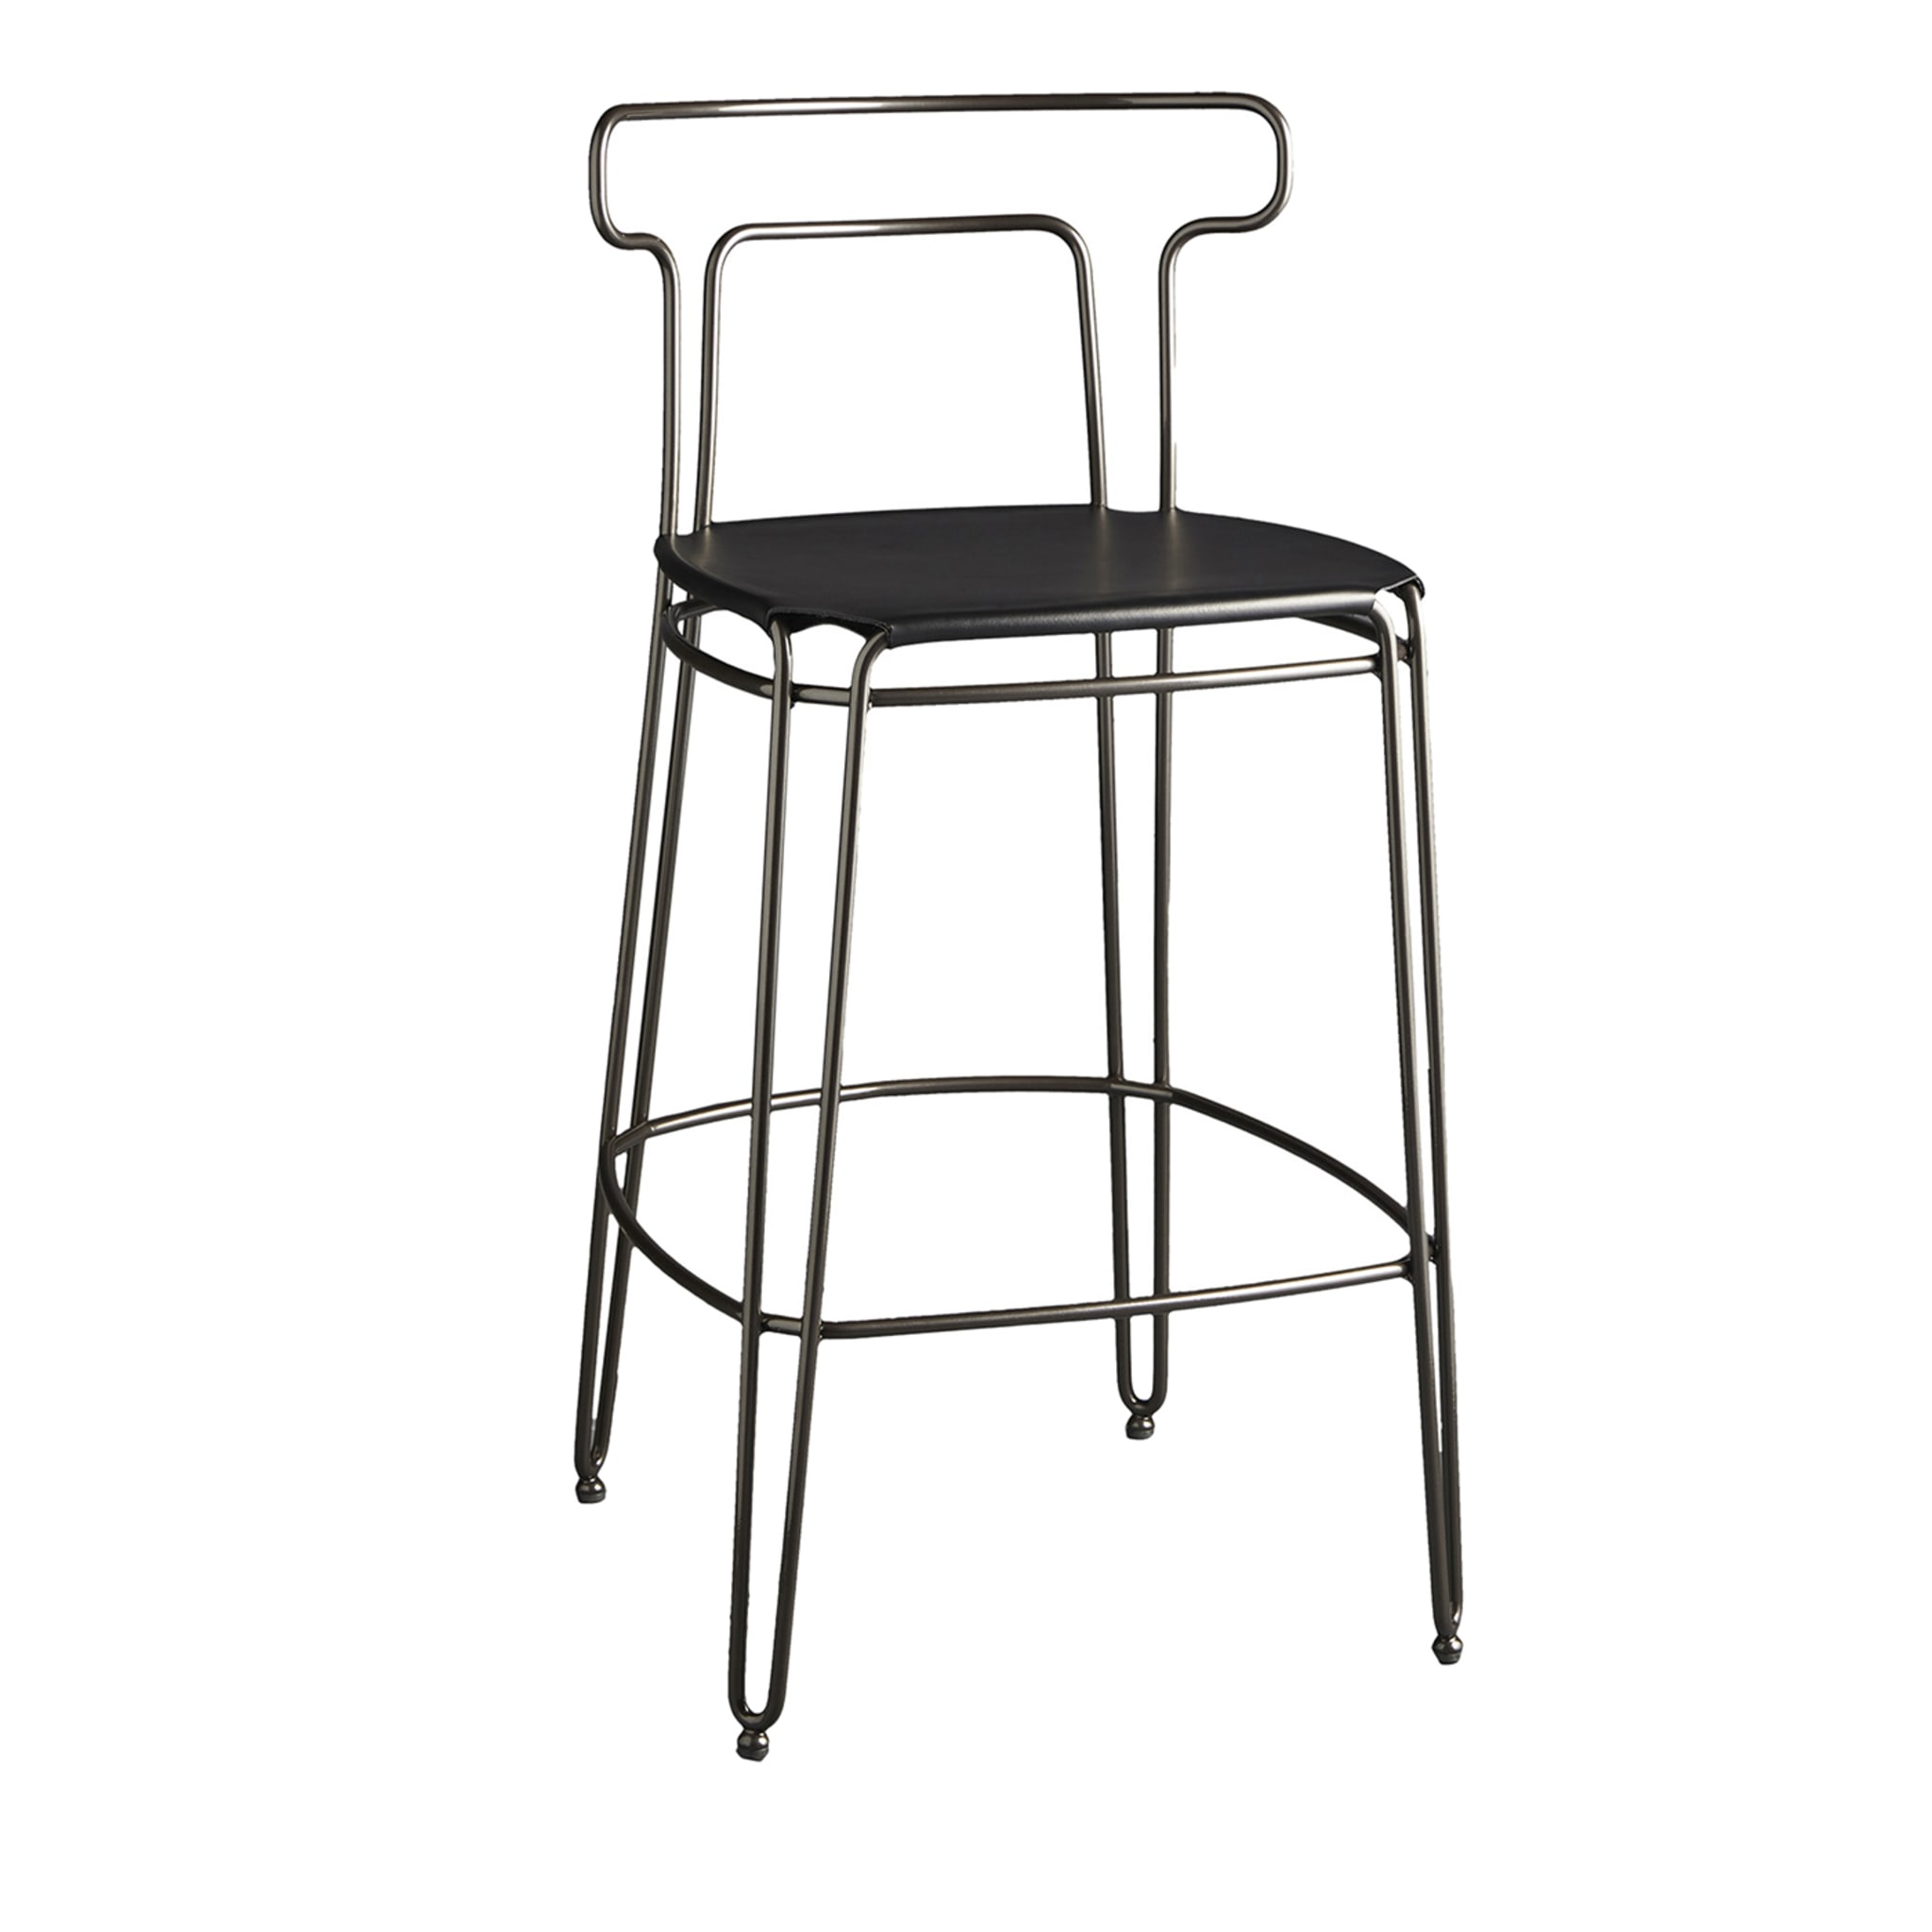 Jackie.ss Black Stool by S. Grassi - Main view